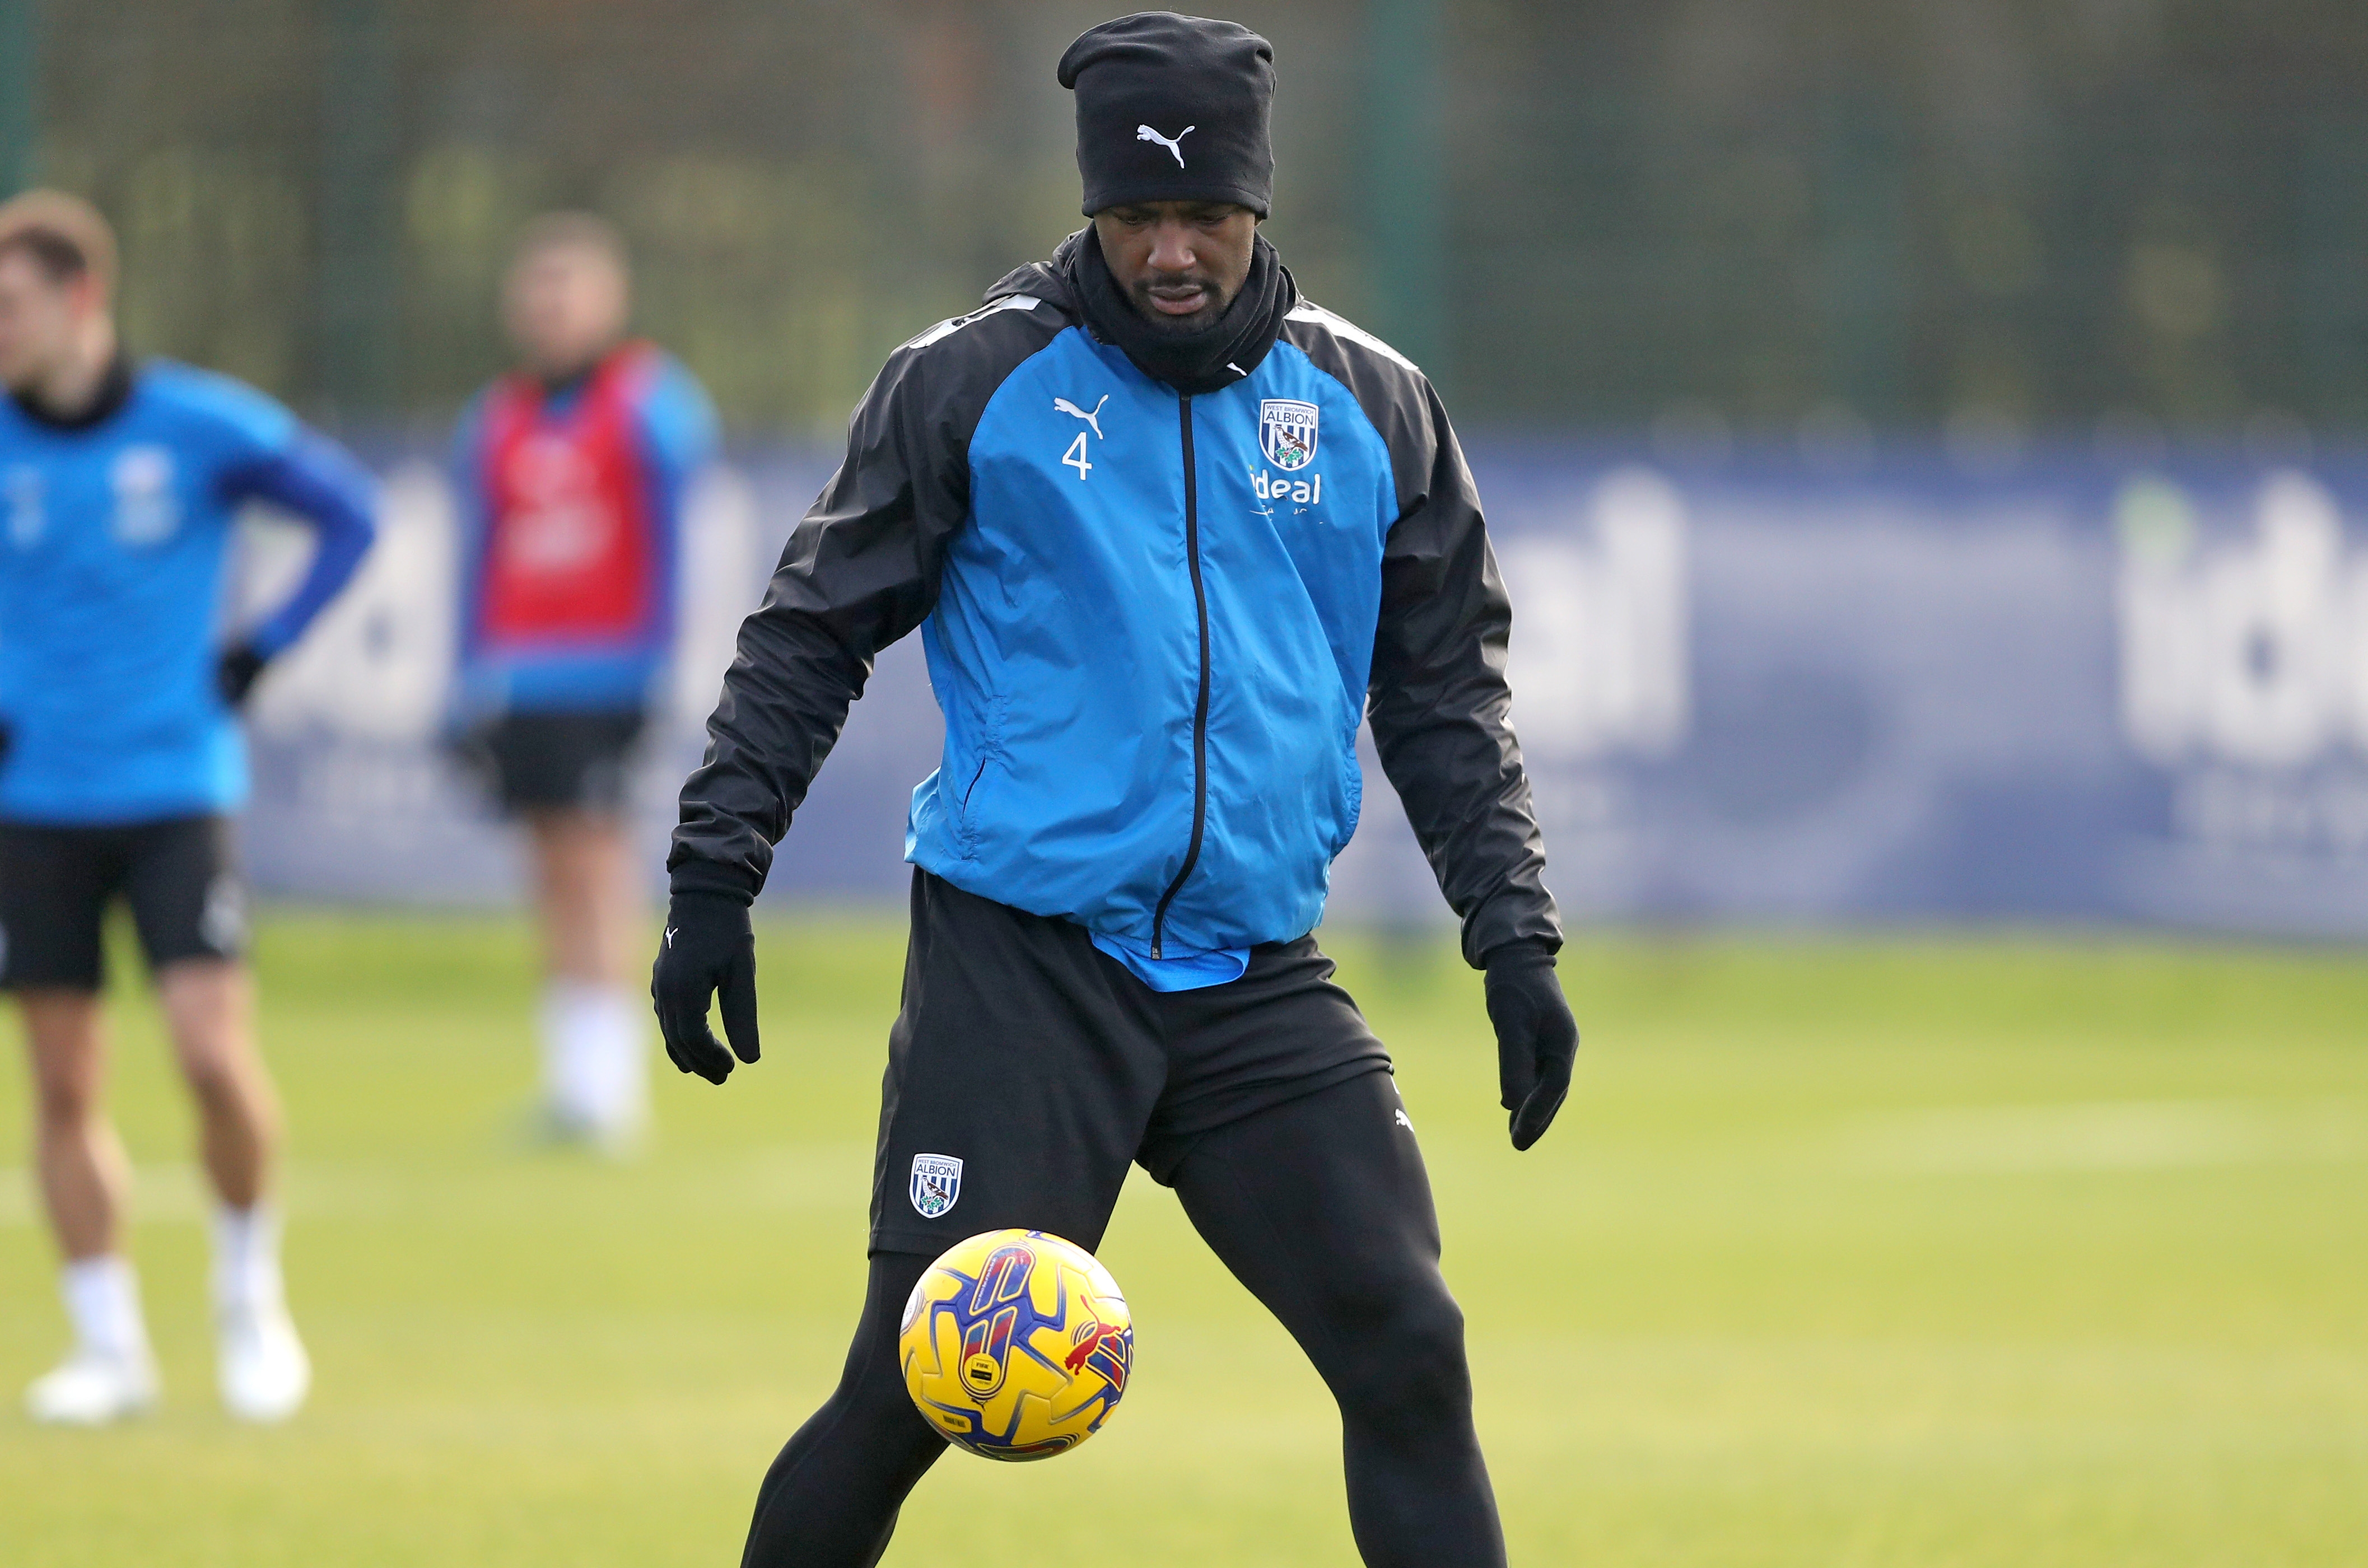 Cedric Kipre on the ball in training while wearing a hat